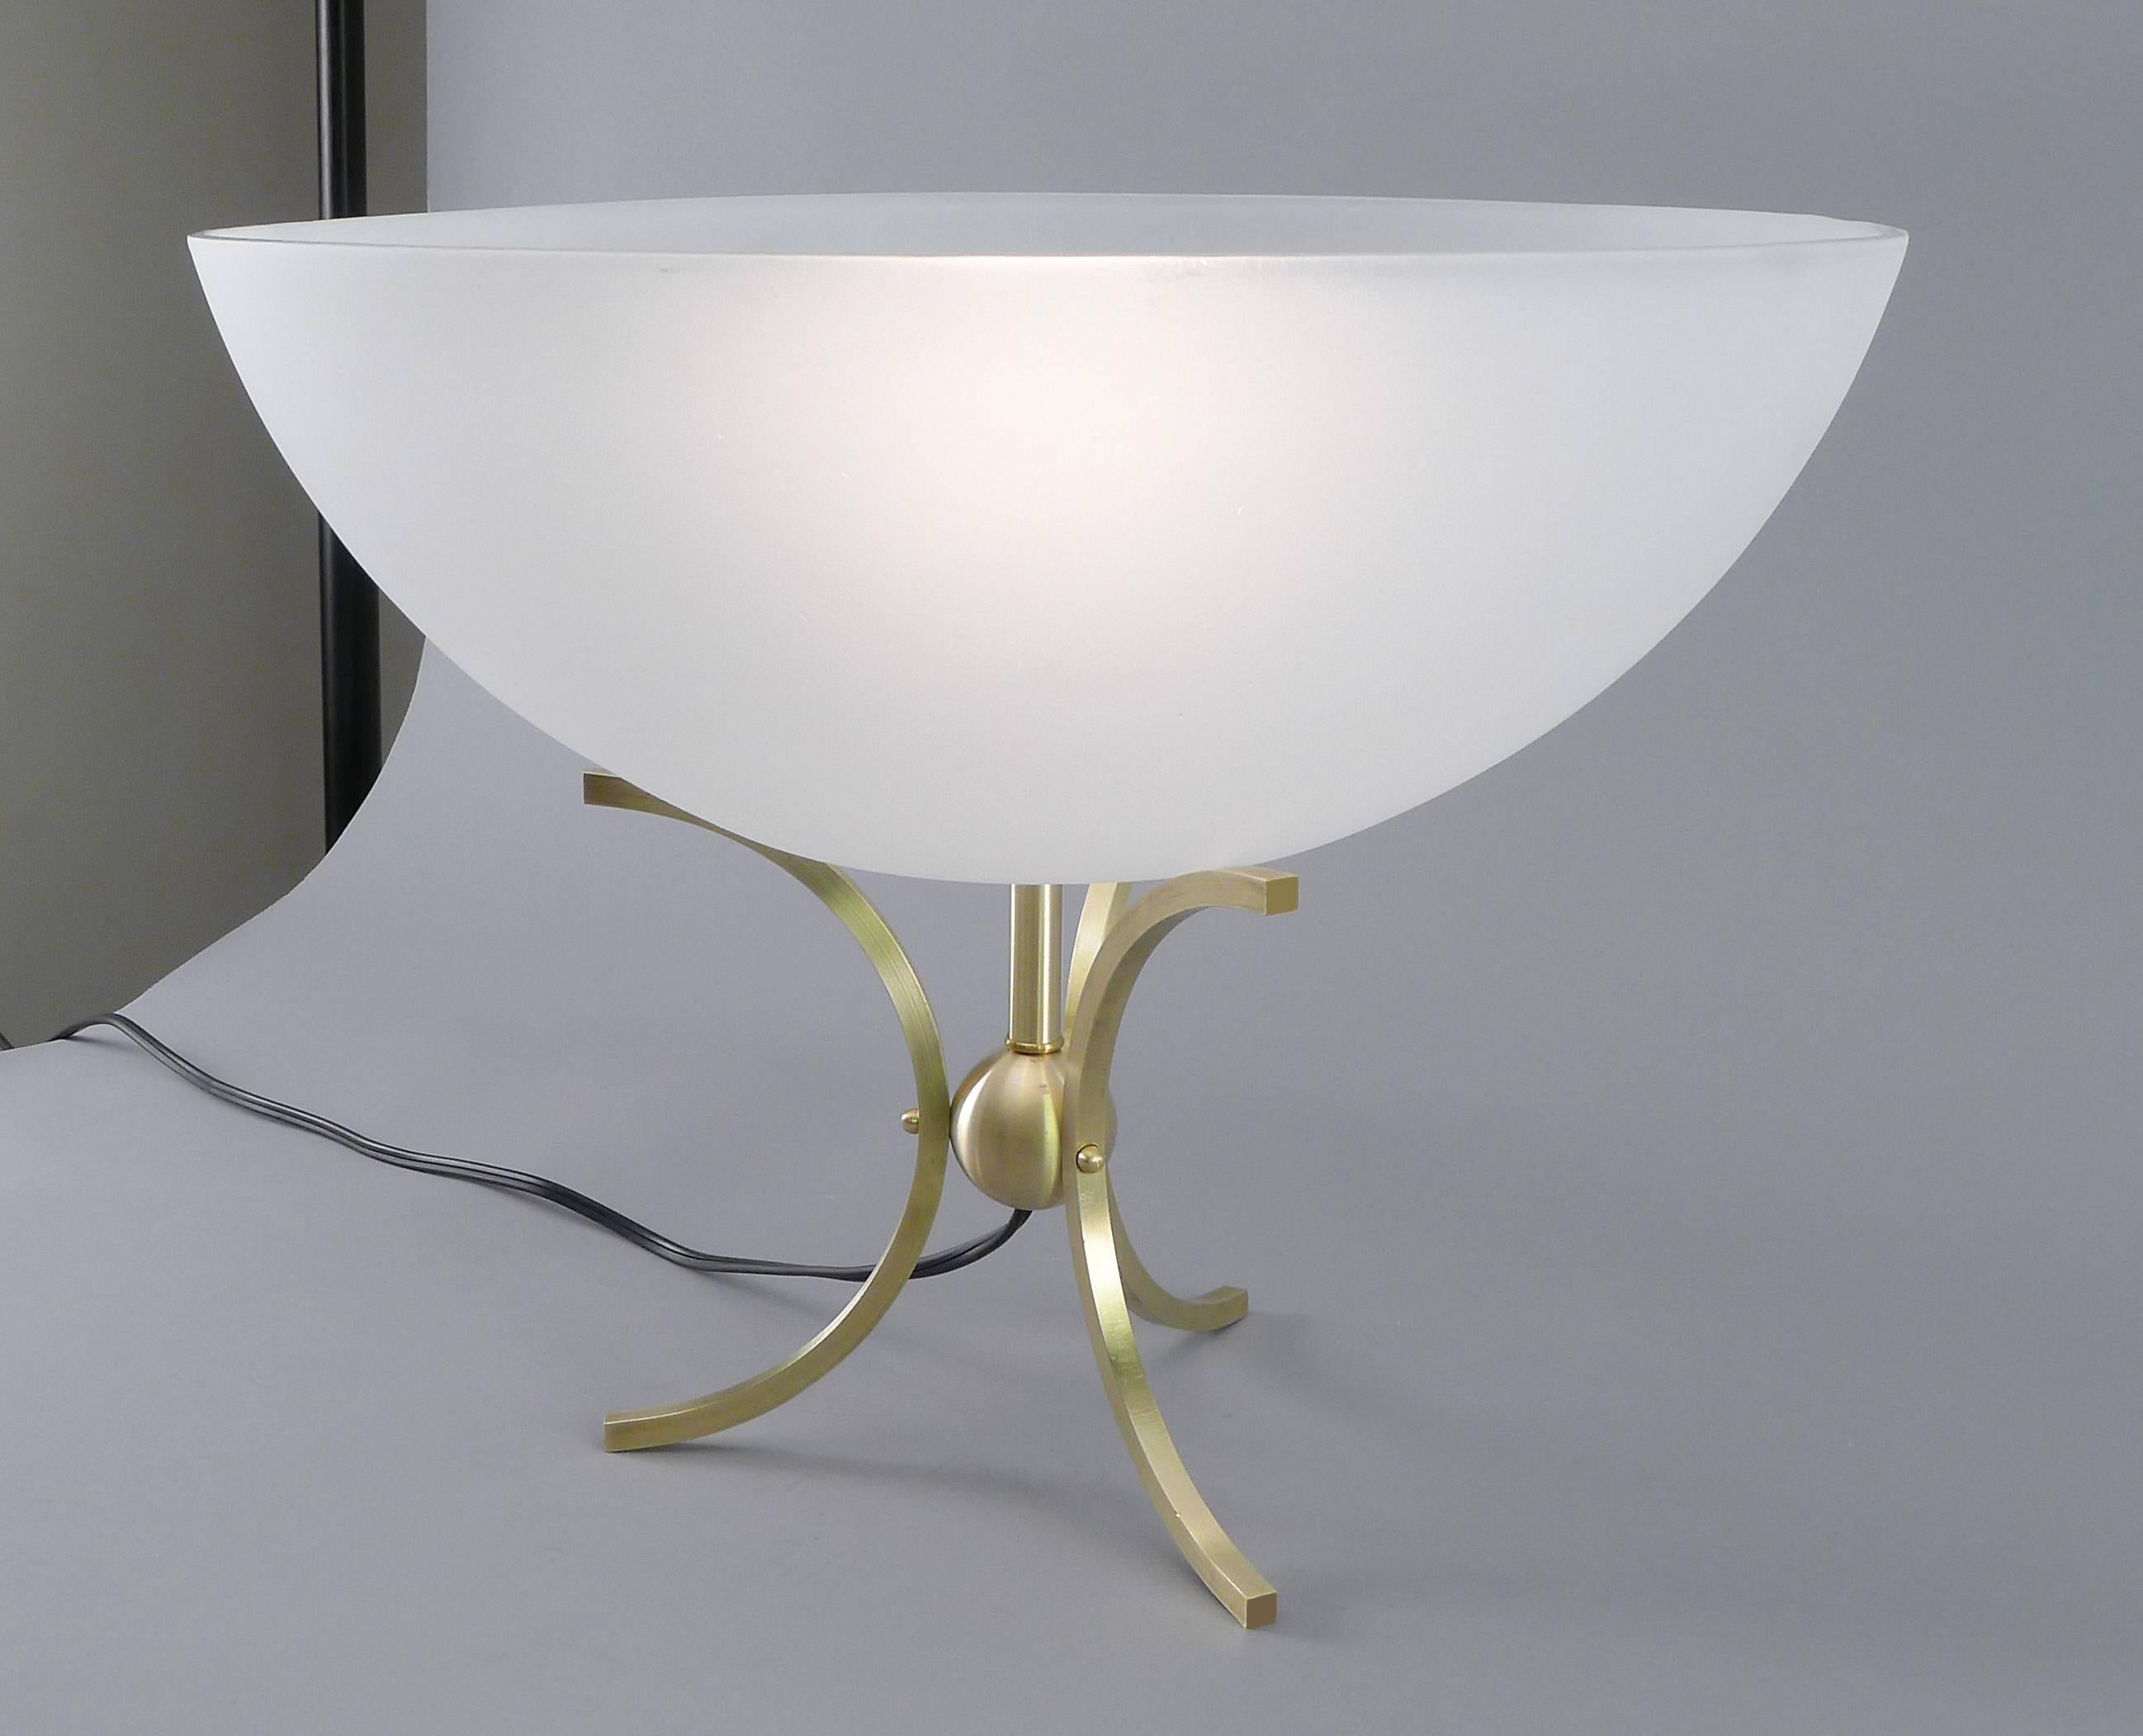 Hollywood Regency style lamp with curved brass legs. Solid brass center ball ideal for desk or pedestal. Incandescent lamping with cord, plug and switch.
Glass bowl is low-iron (no green tint) and is frosted outside.

Architect, Sandy Littman of